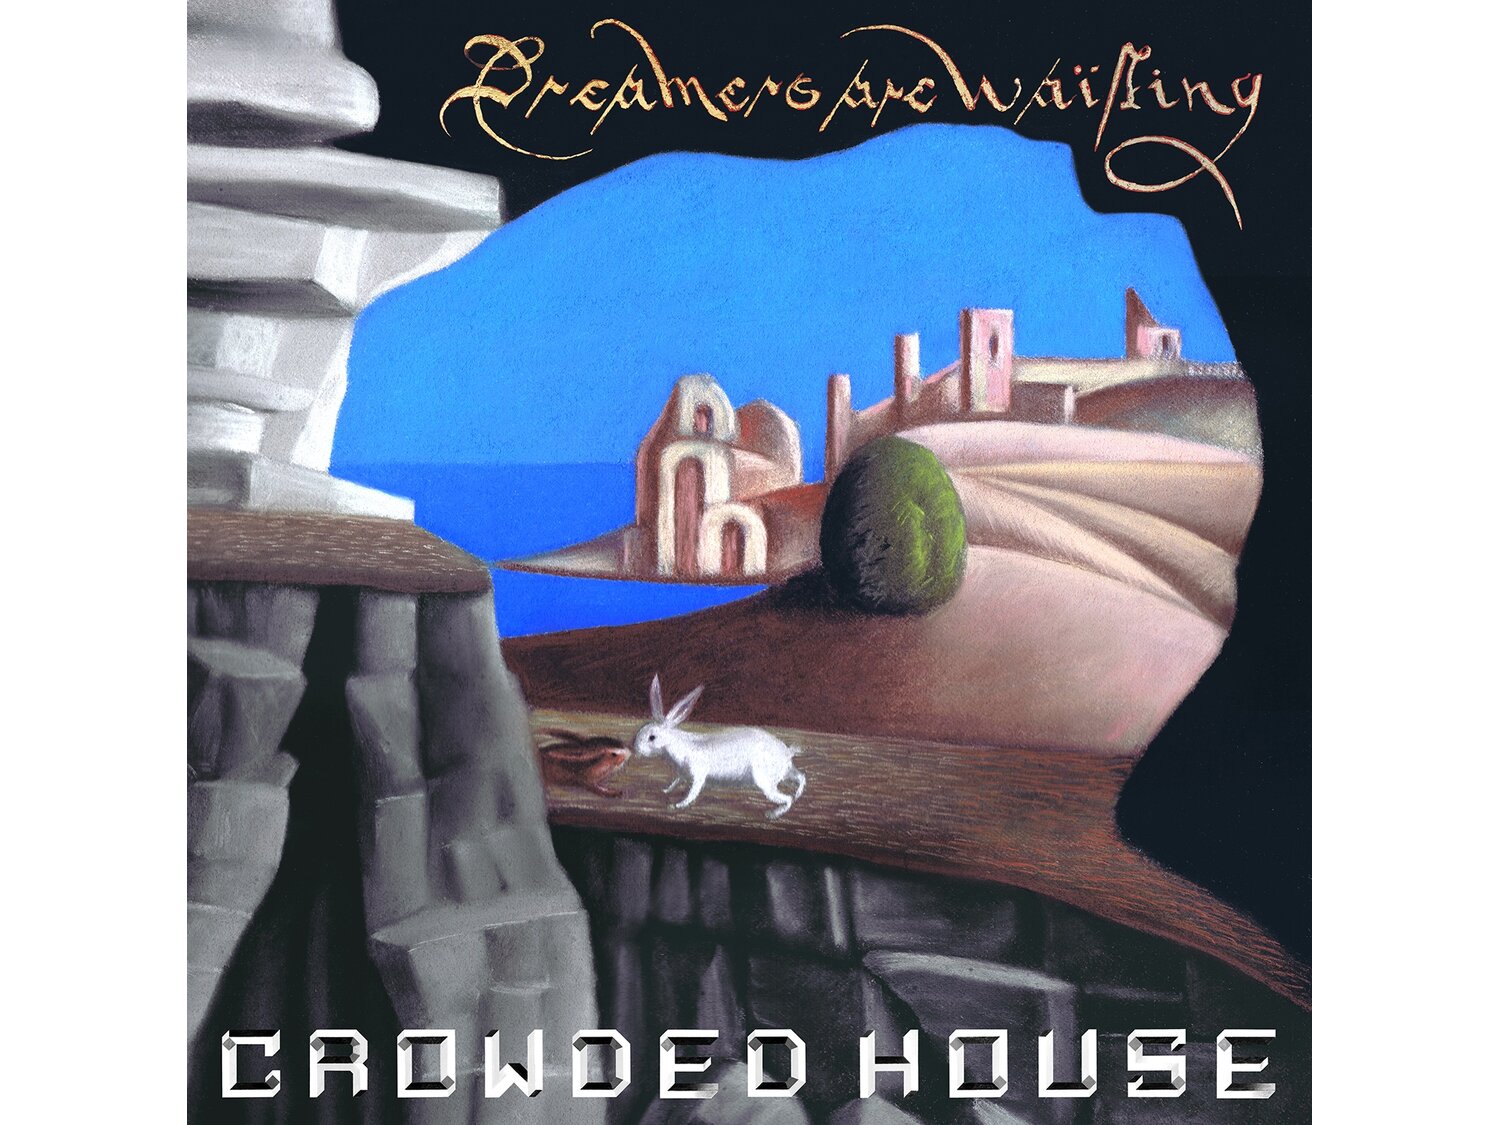 CROWDED HOUSE